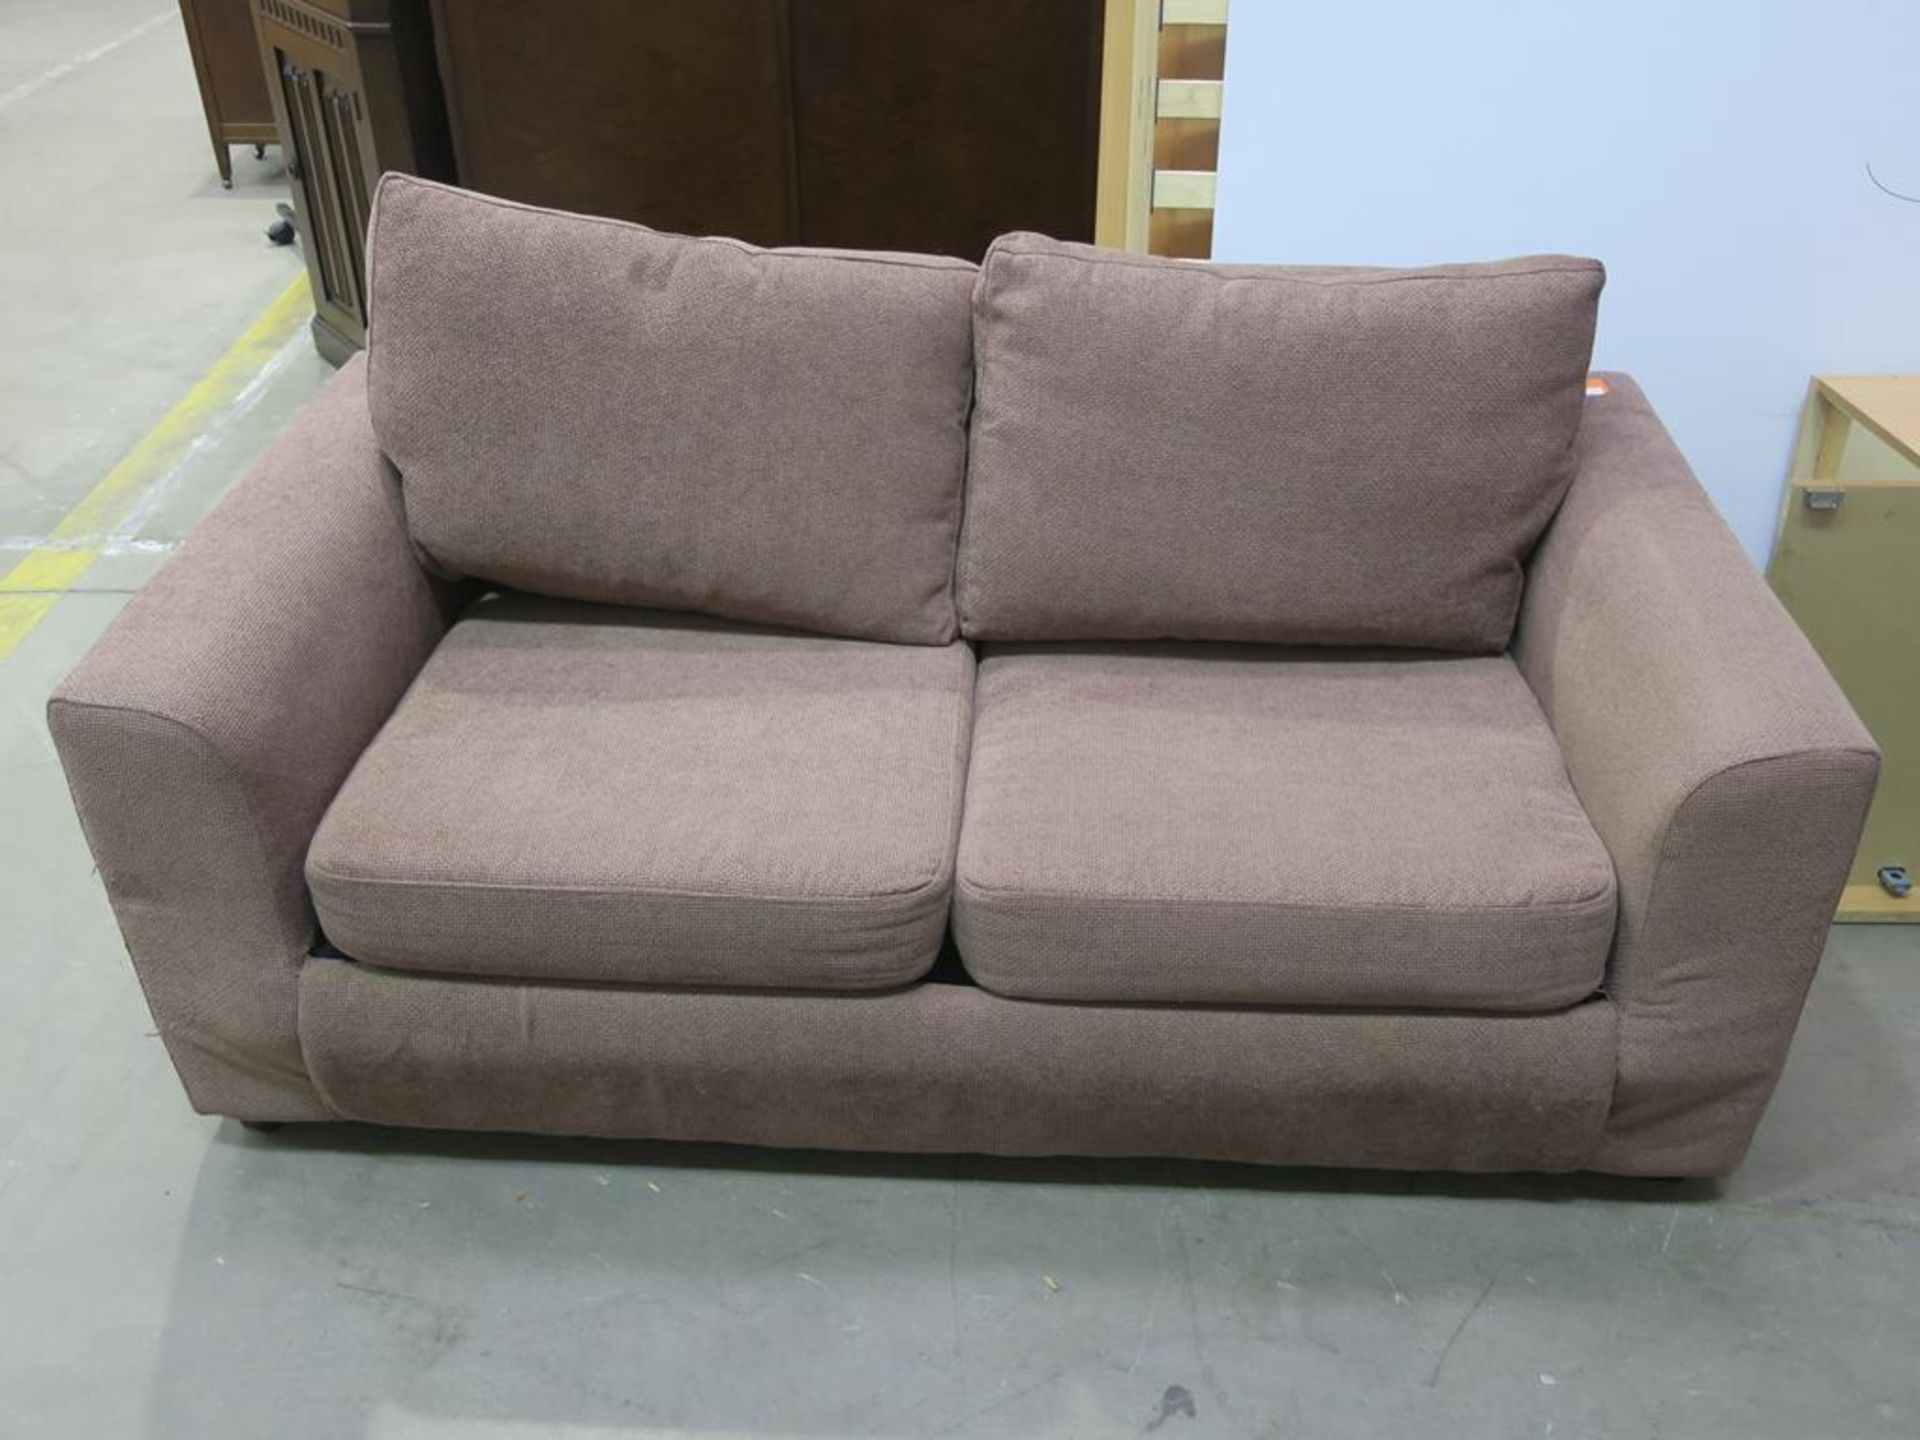 A two seater Bed Settee with a brown weave style upholstery (est £50-£100)